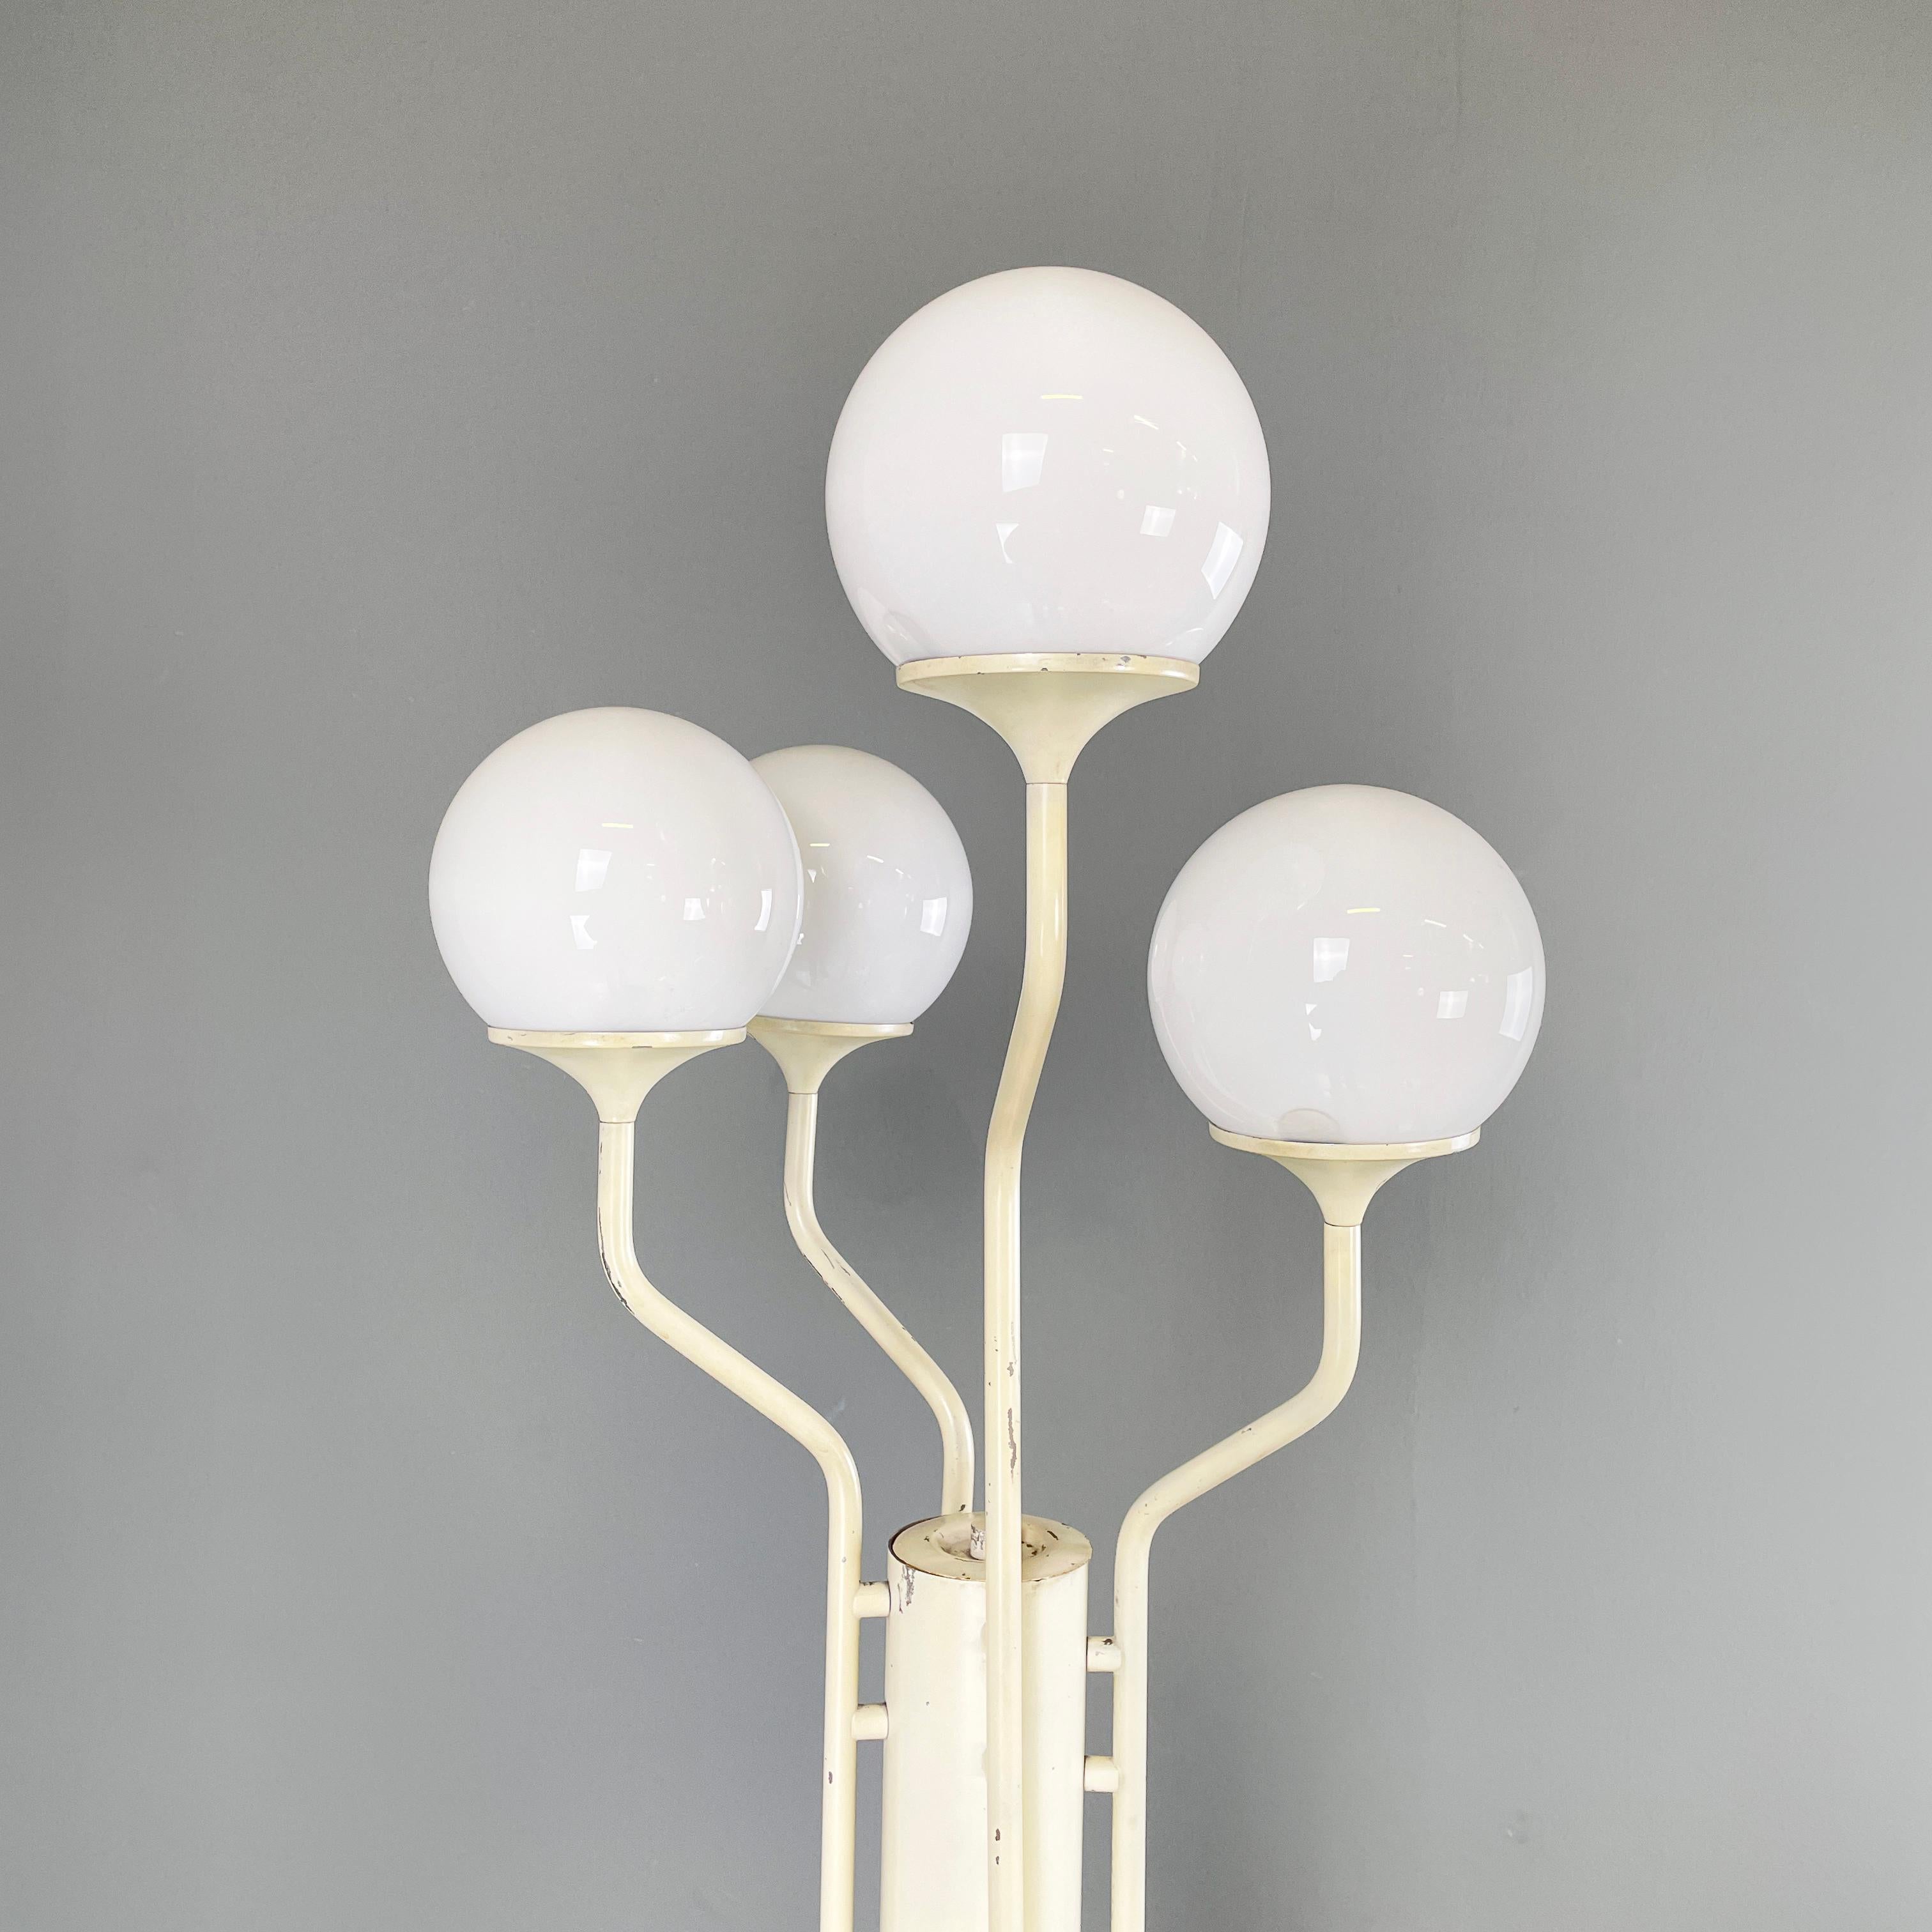 Italian modern floor lamp in opaline glass and white metal, 1980s For Sale 1